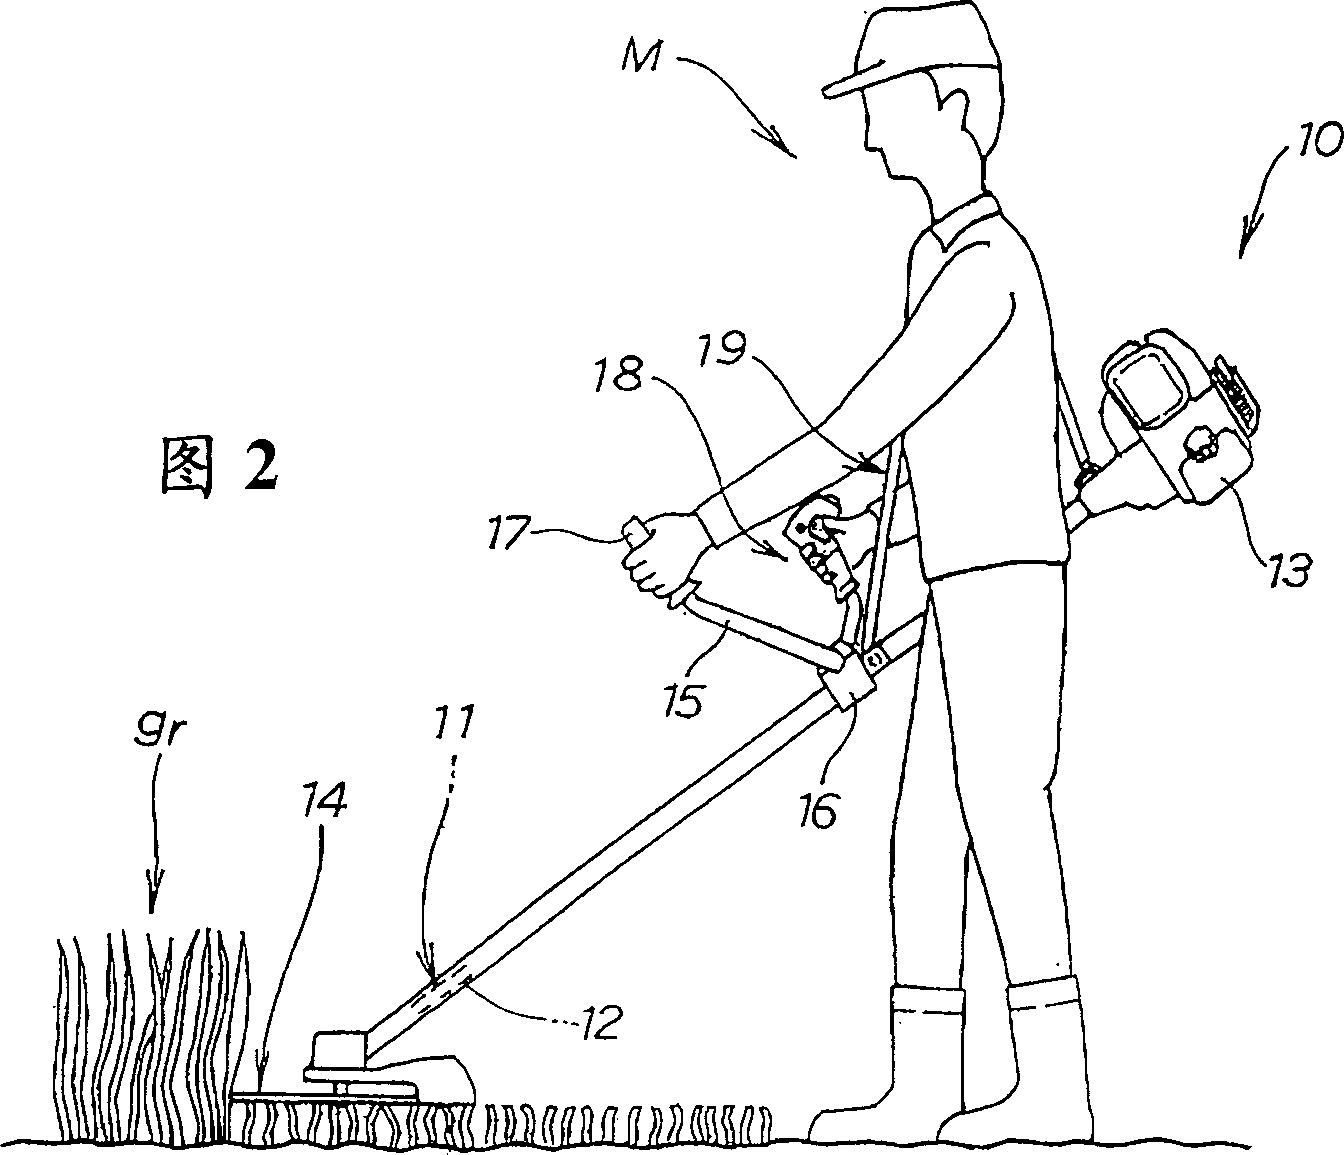 Plant uproot device